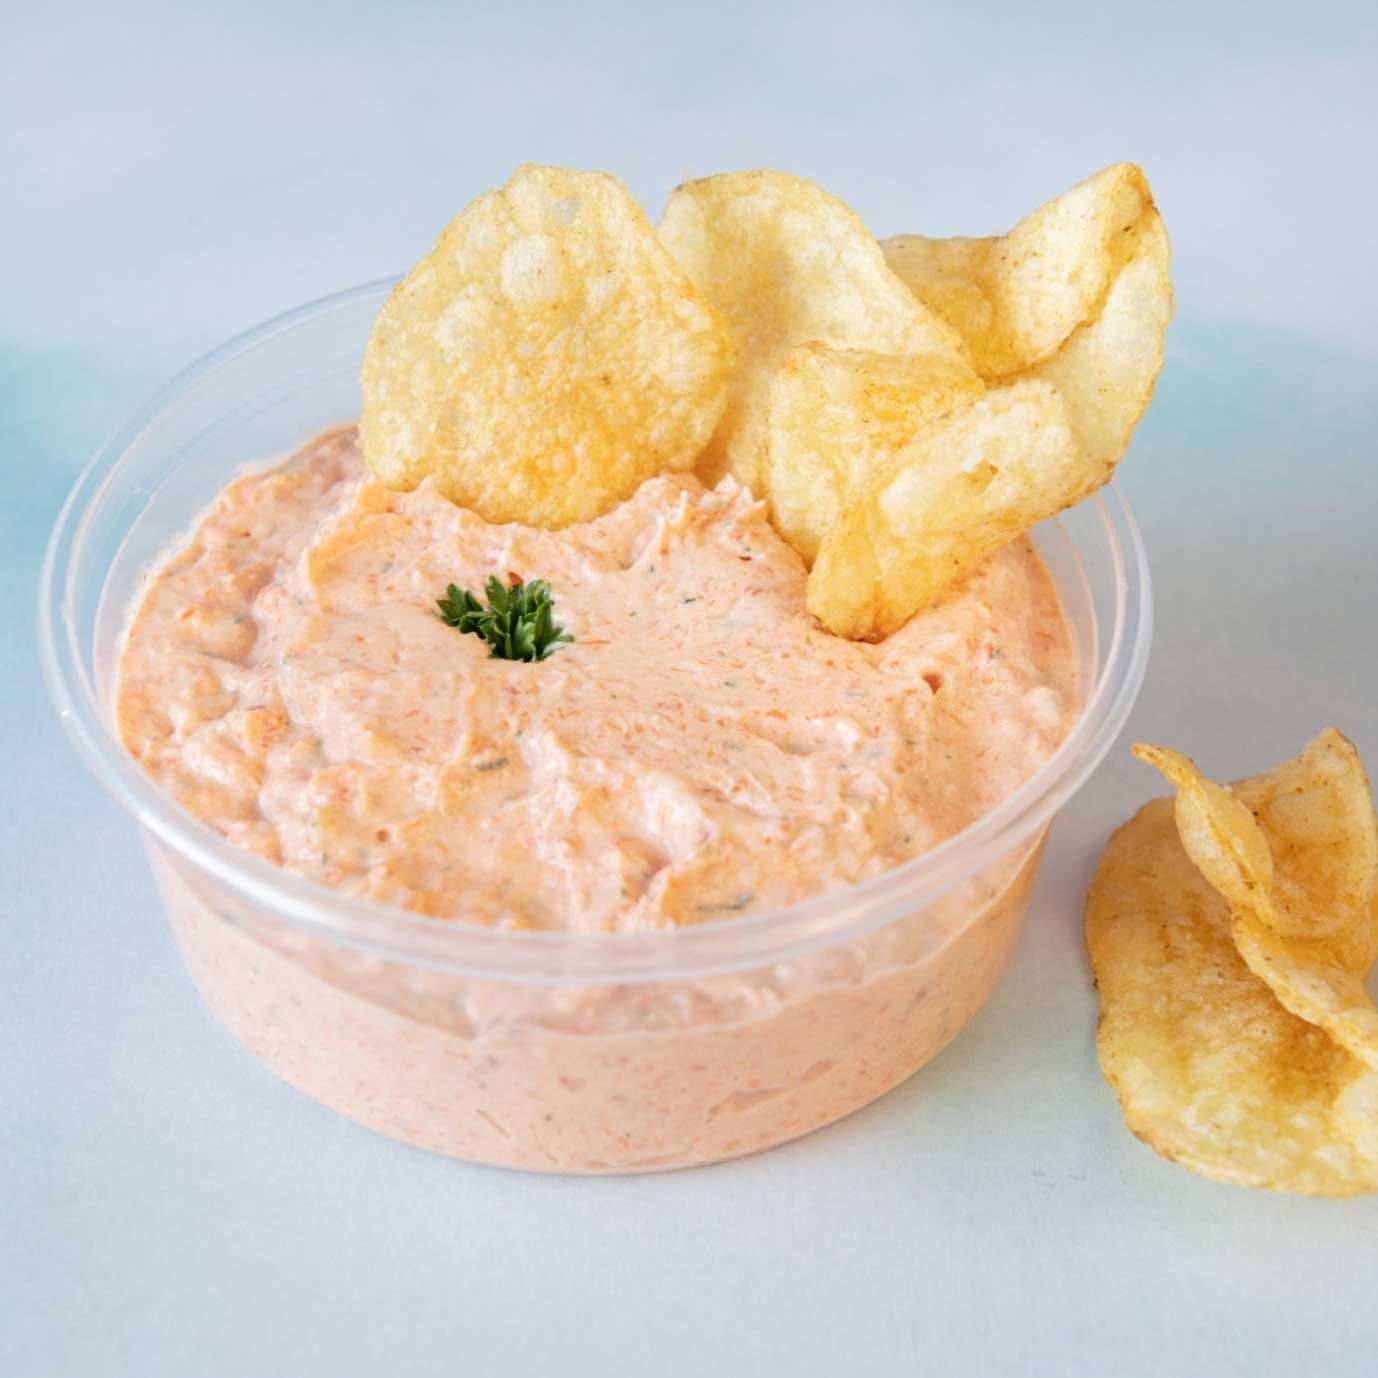 Snack Combo - Smoked Salmon Candy Dip + Chips